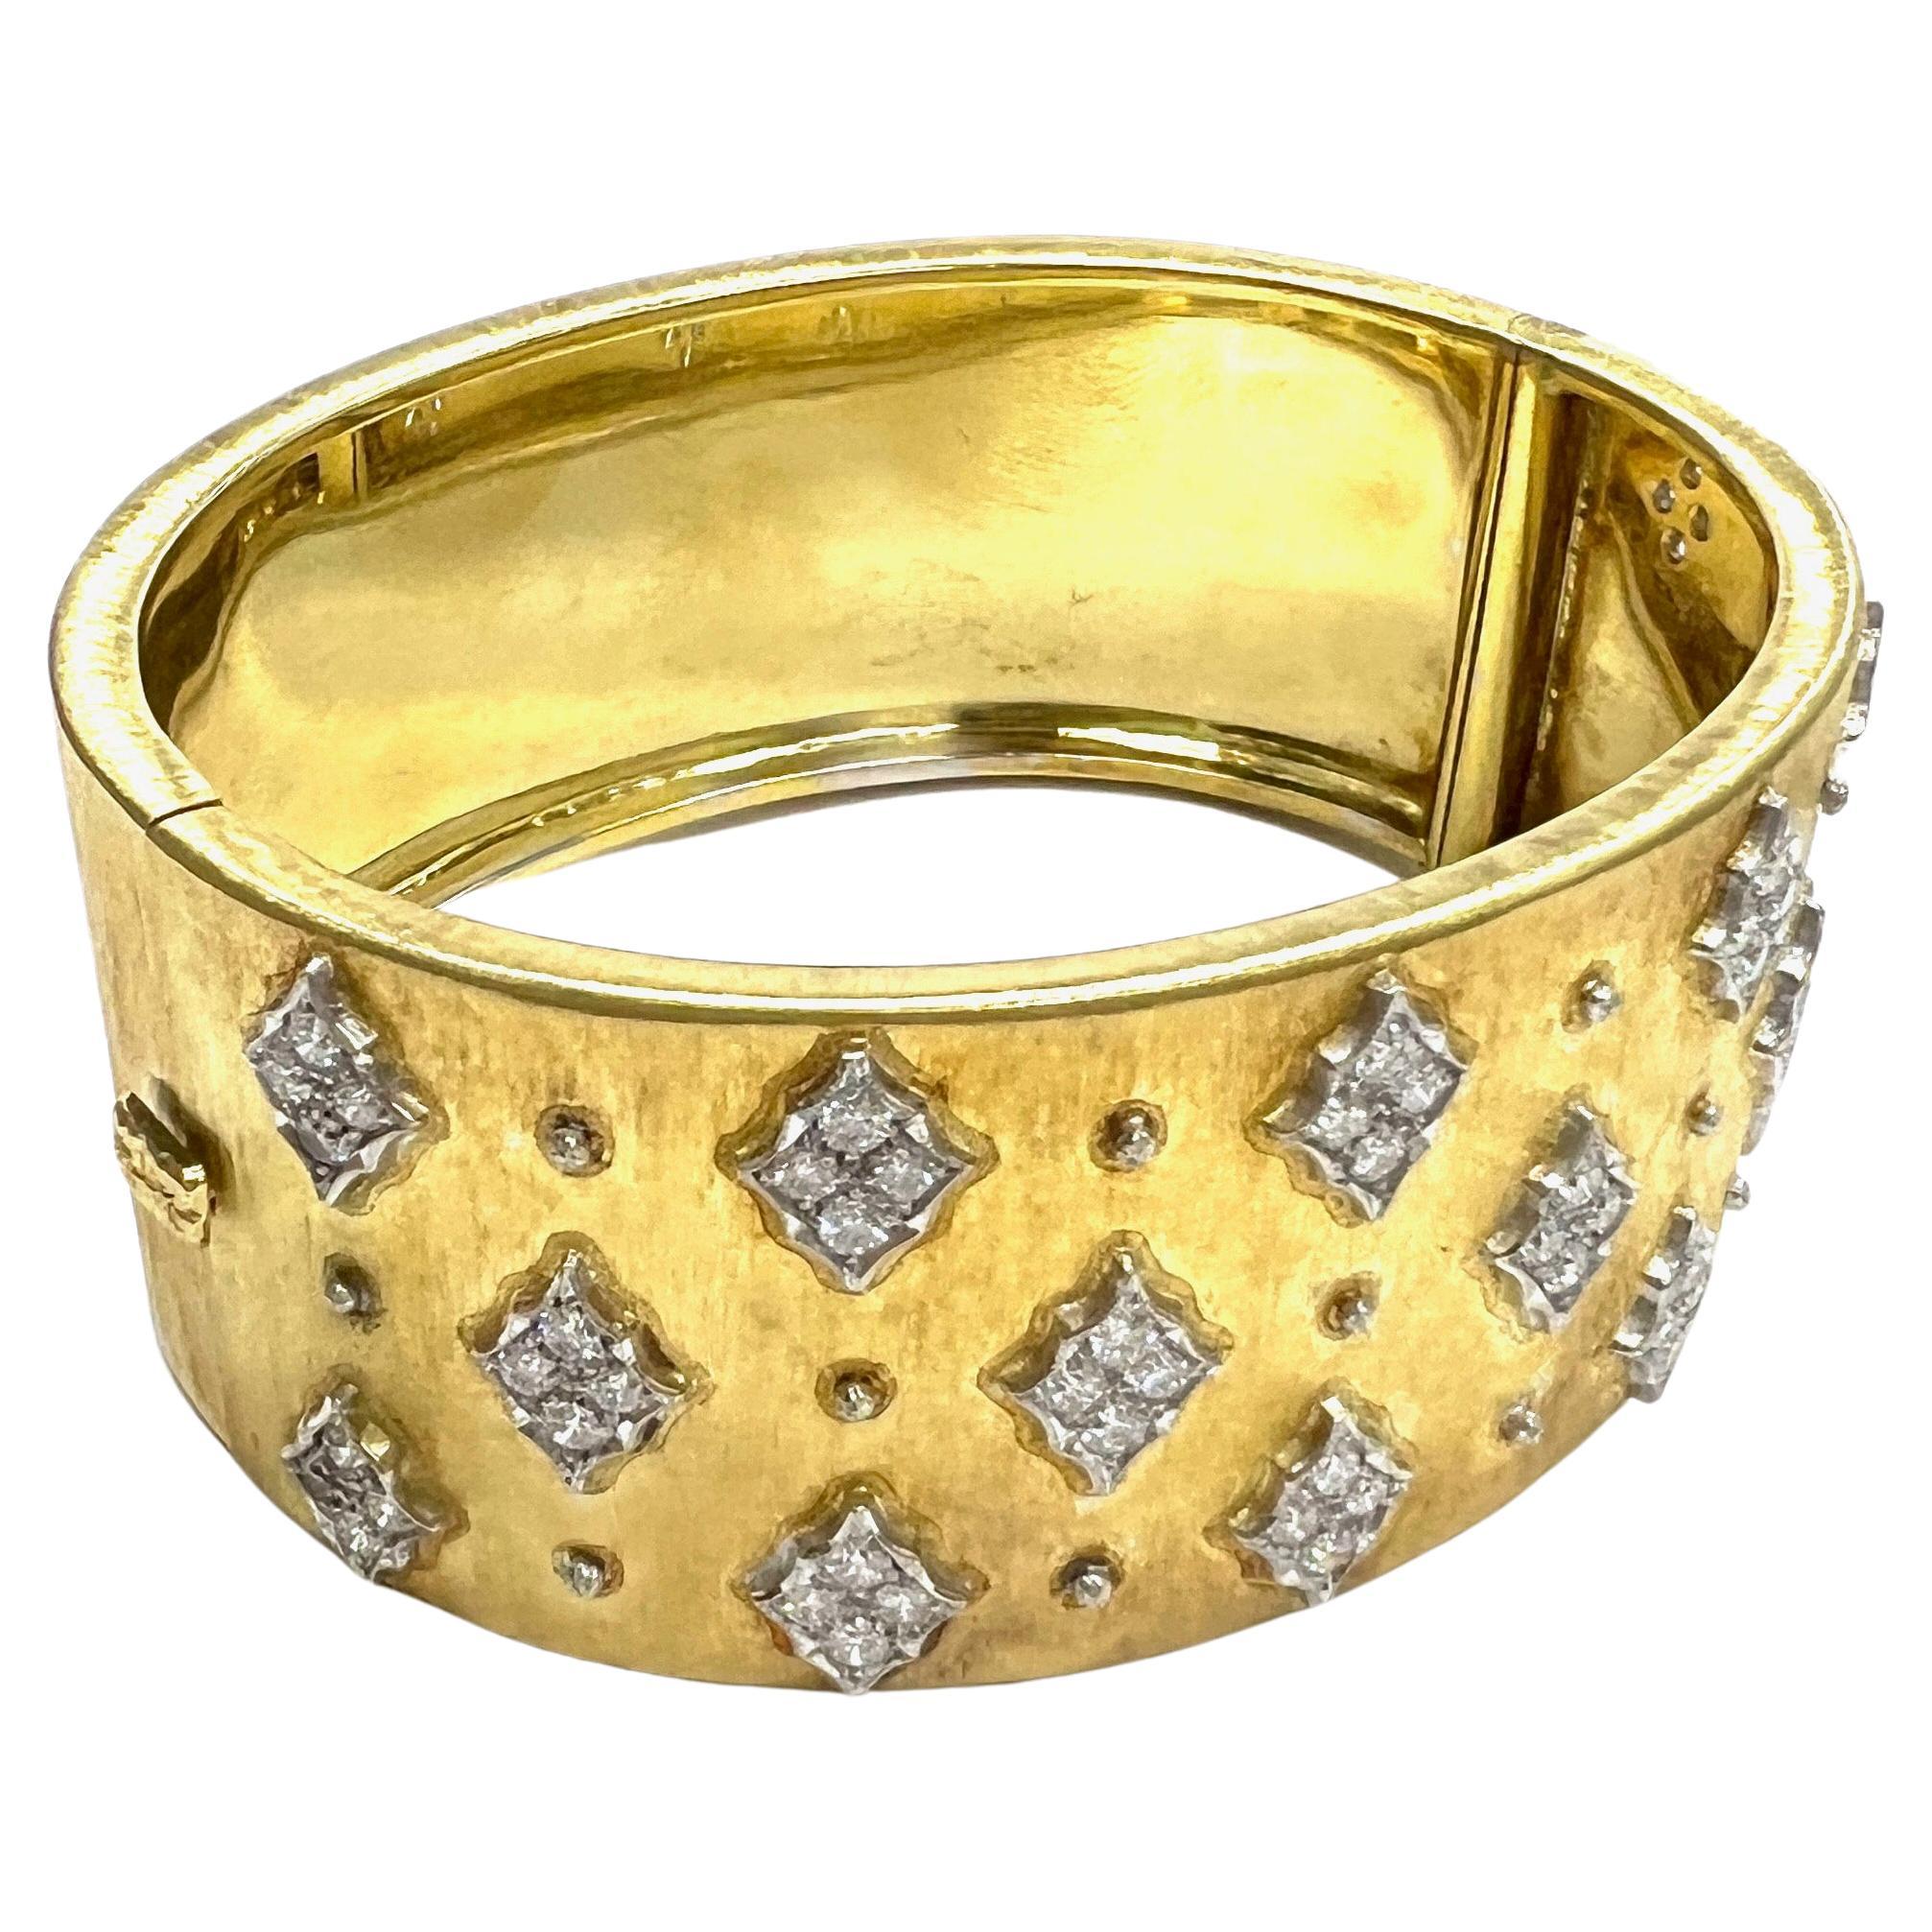 Mario Buccellati Diamond Yellow Gold Wide Bangle Bracelet

Yellow gold with round-cut diamonds of approximately 1.70 carats; marked M. Buccellati

Size: width 1 inch; inner circumference 6.75 inches
Total weight: 67.3 grams